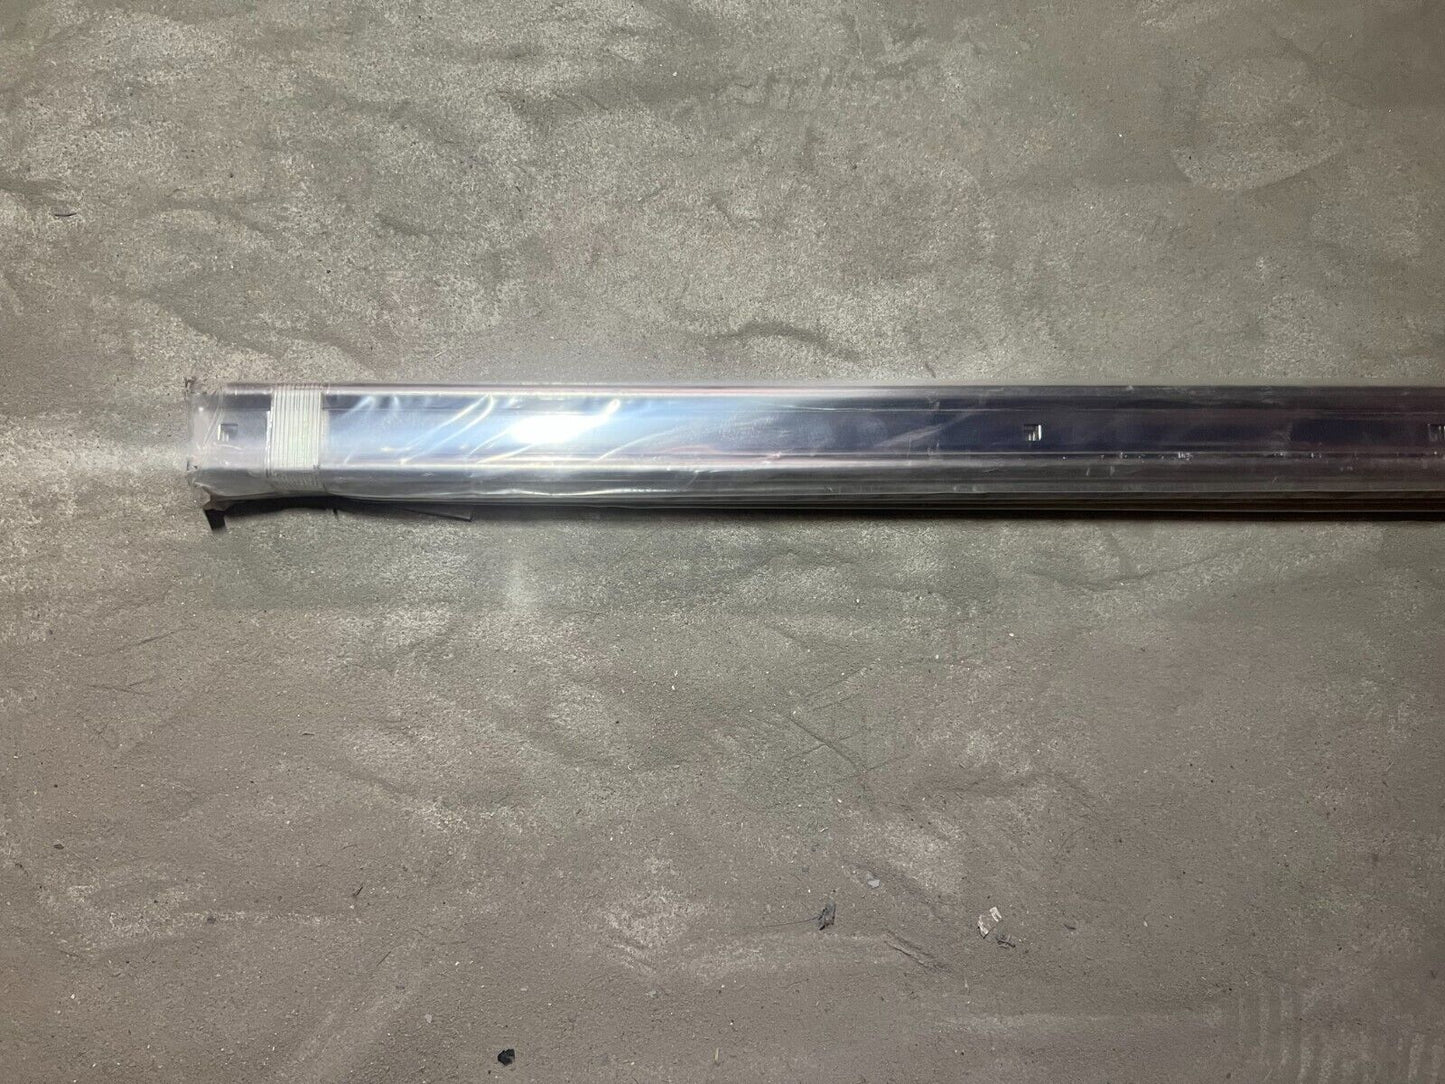 1500 Chevy 1973-1980 Short Bed Strip